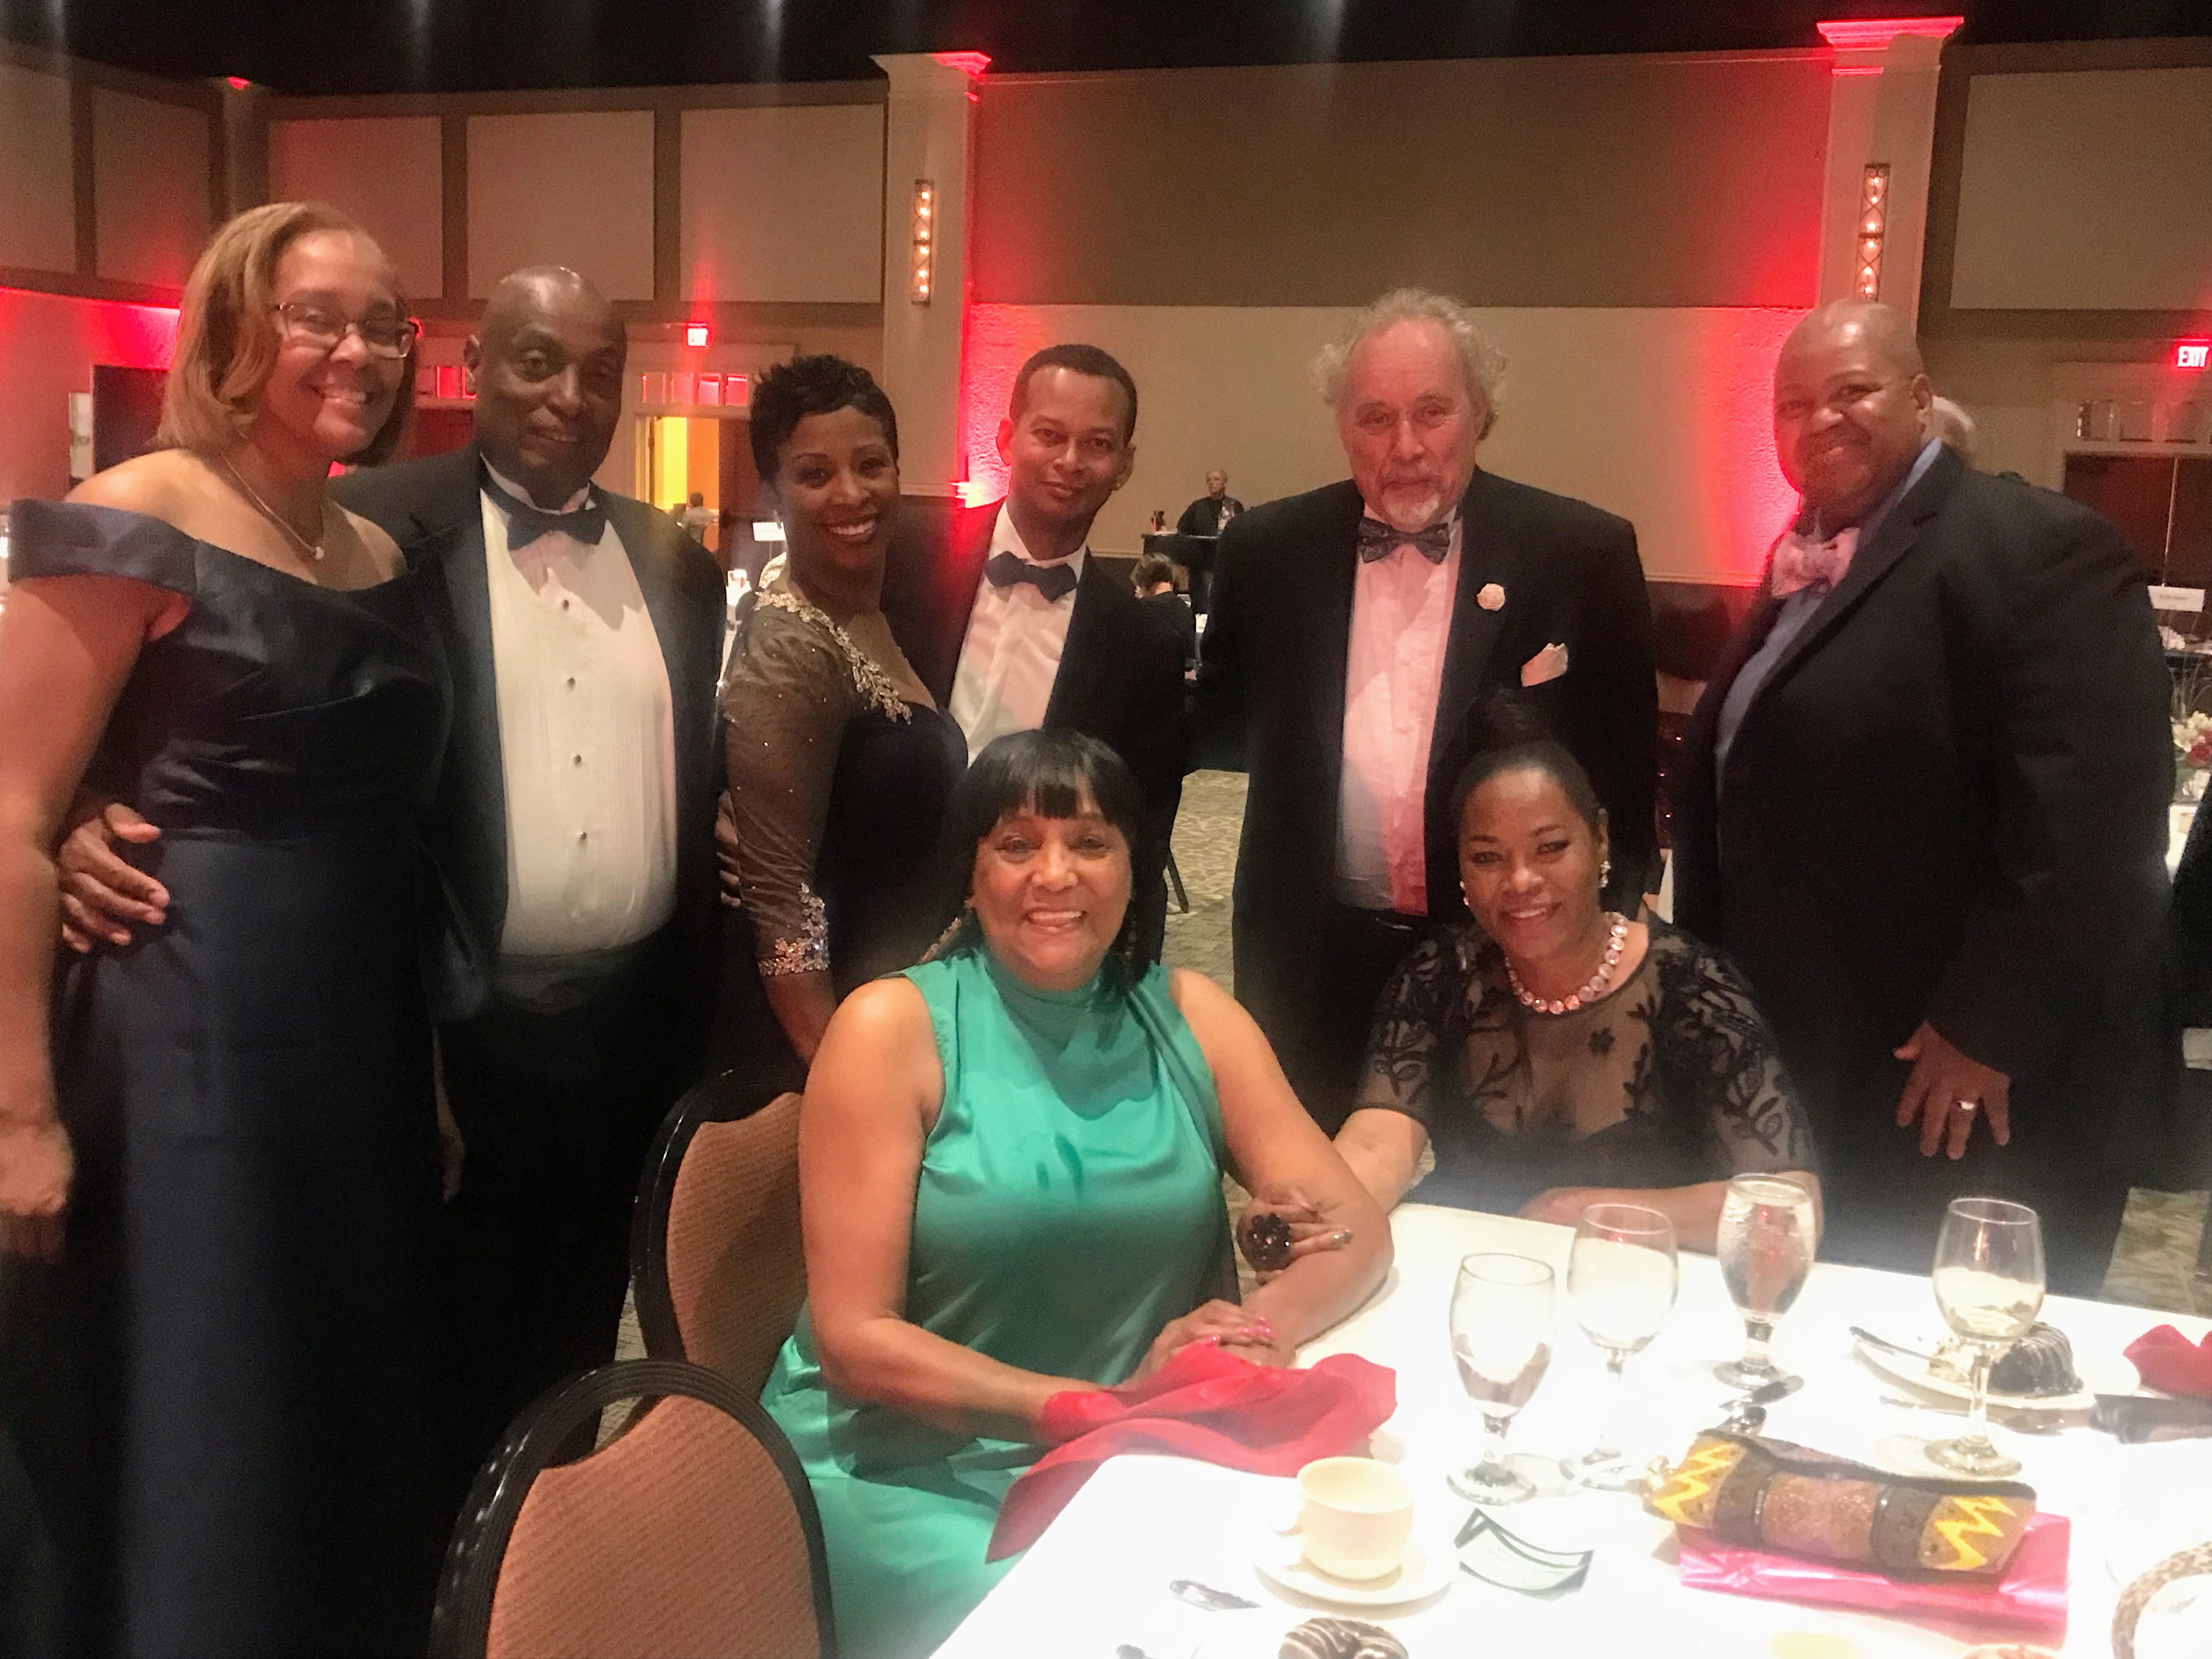 The Hargrove Guests at the 2019 Club Twenty-One Dinner - Great Photo To Remember the Night